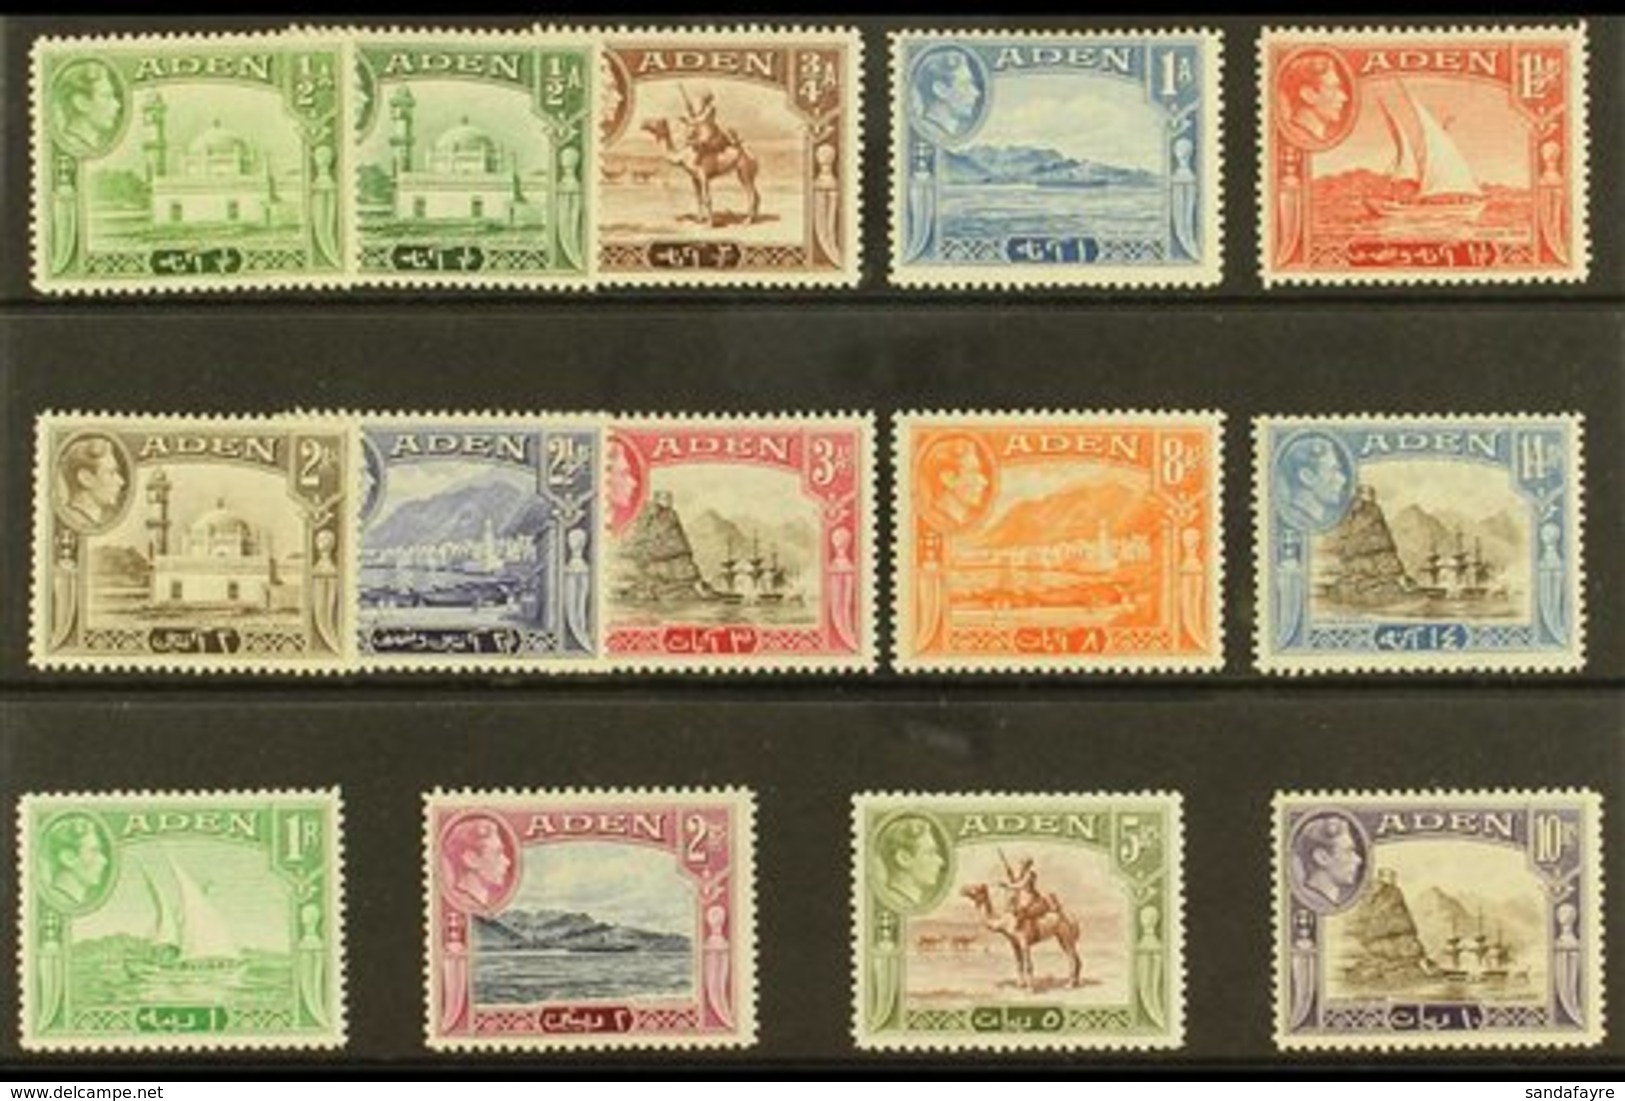 \Y 1939-48\Y Pictorial Definitive Set Plus ½a Listed Shade, SG 16/27, Very Fine Lightly Hinged Or Nhm (14 Stamps) For Mo - Aden (1854-1963)